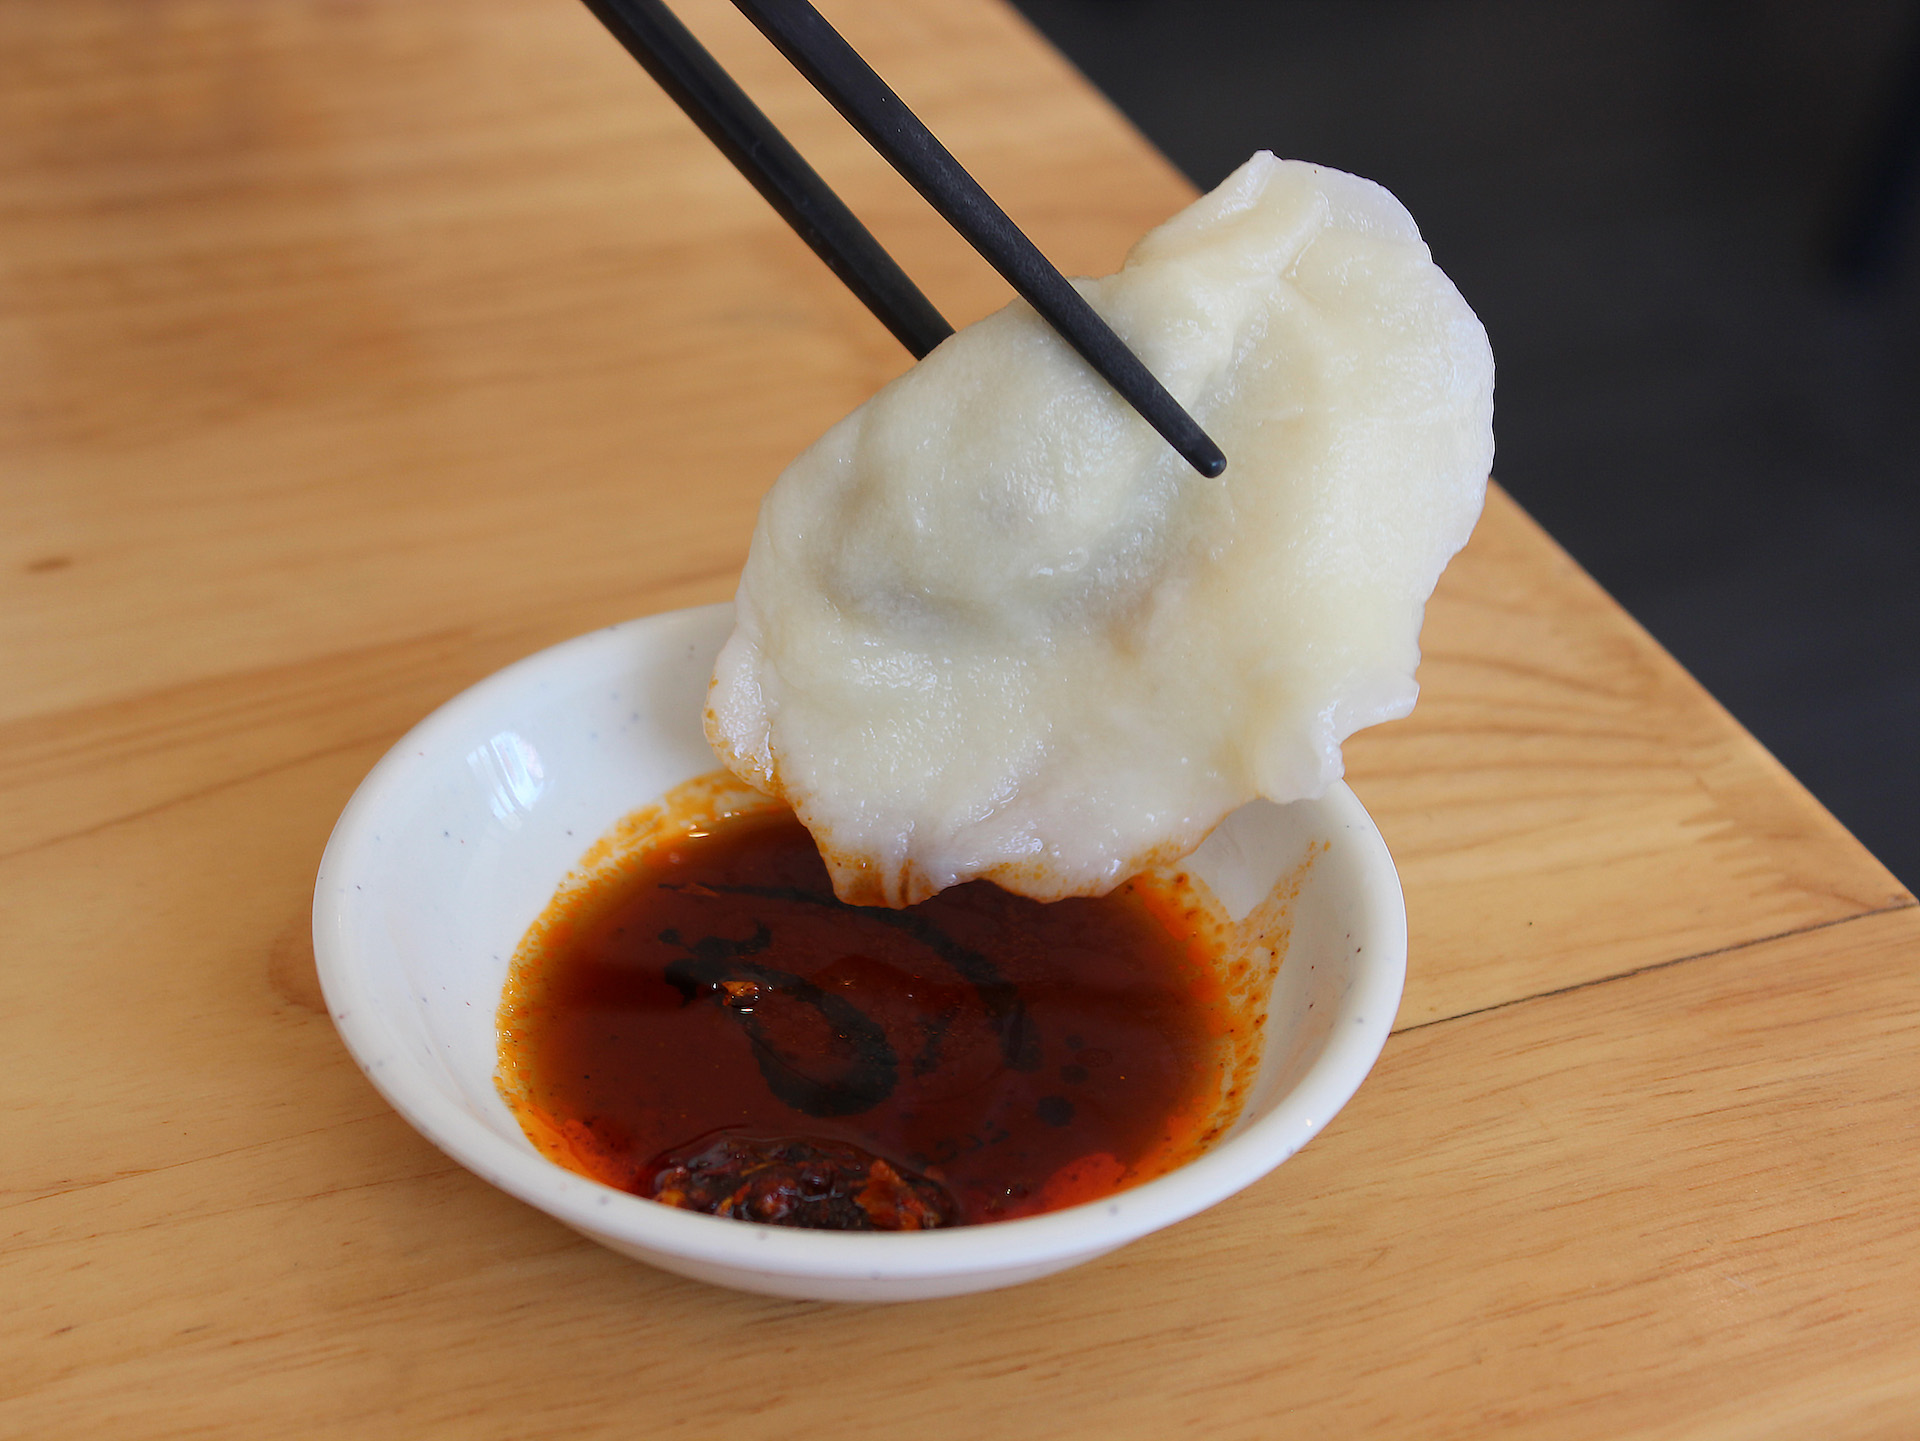 The boiled Northern Chinese dumplings at Yuanbao Jiaozi are made in front of your eyes.